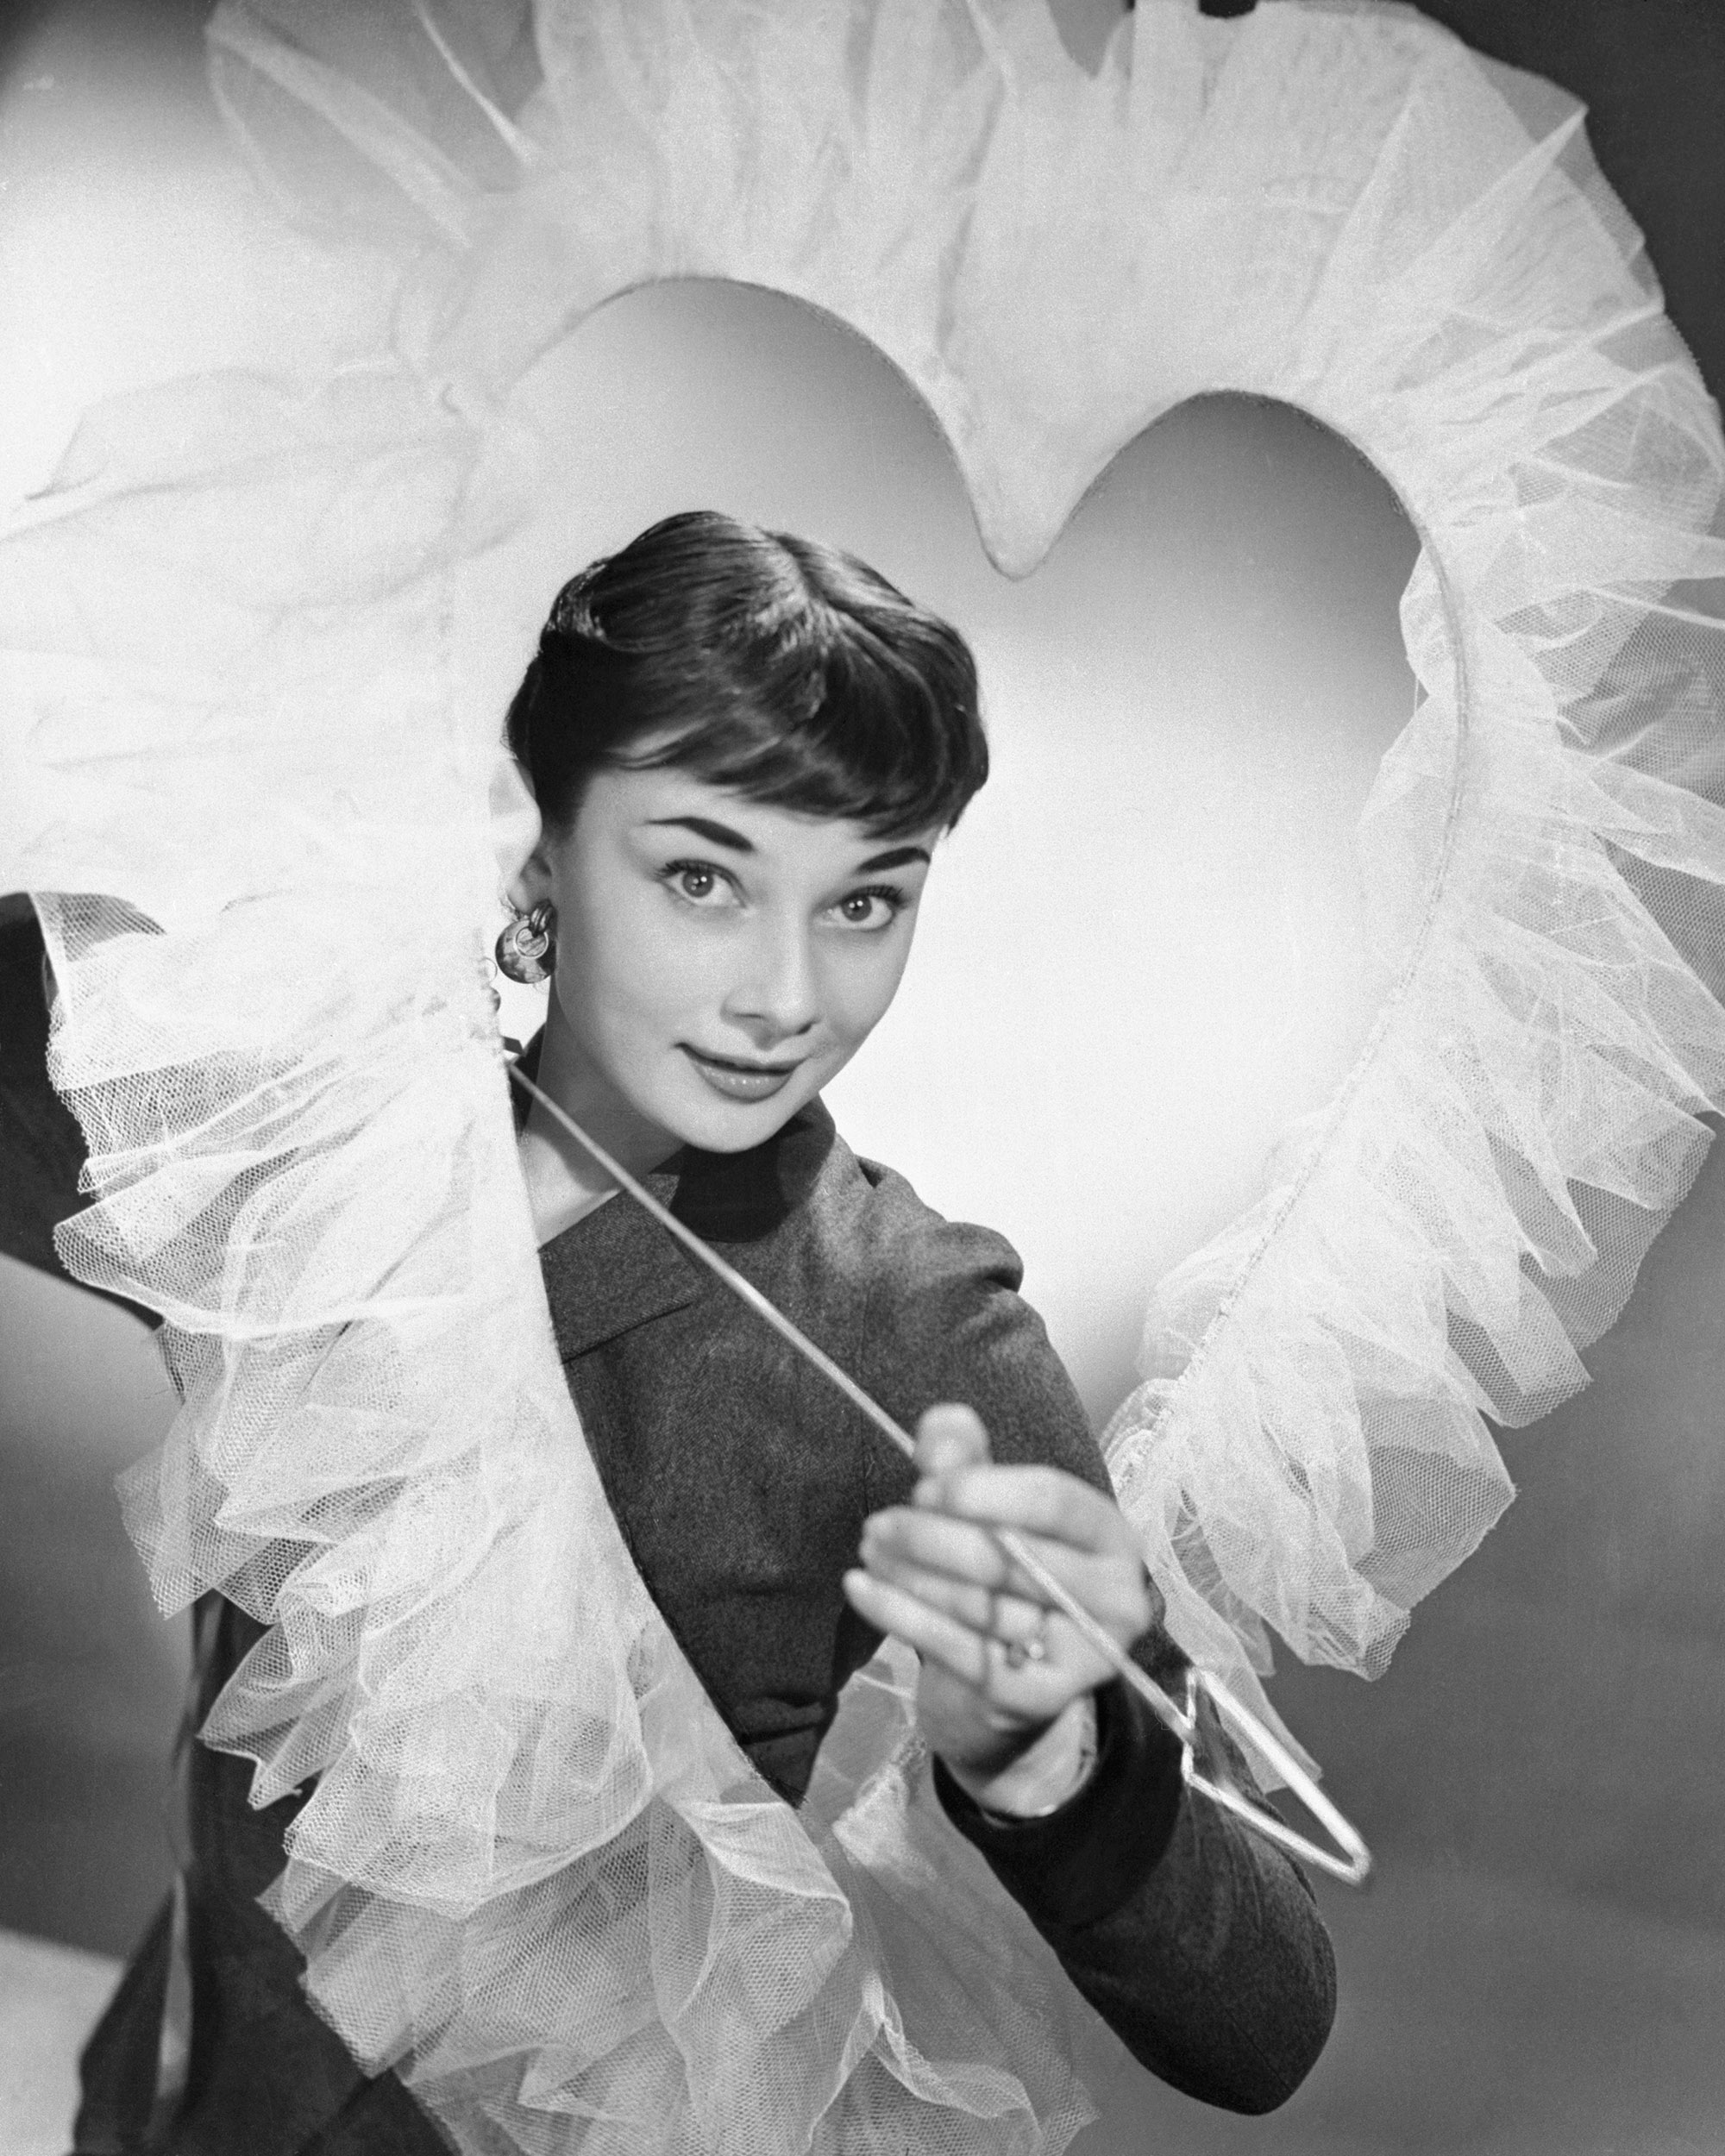 Audrey Hepburn makes a lovely Valentine decoration, complete with Cupid-like smile and arrow as she looks through a large heat-shaped opening with frills around it.